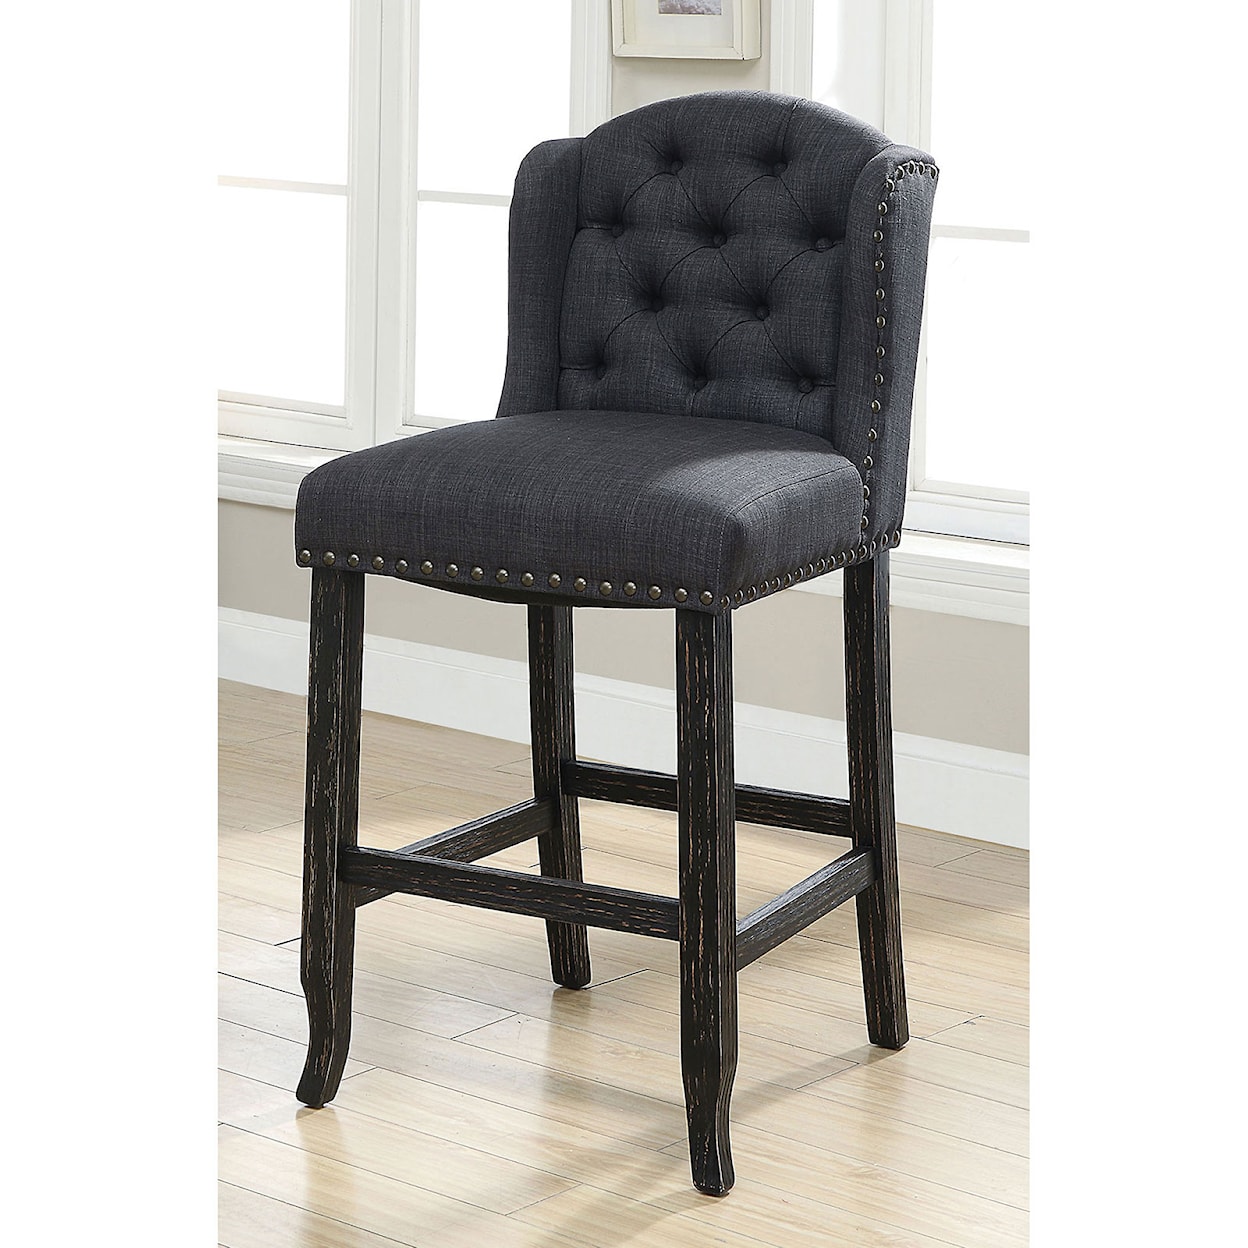 Furniture of America Sania III Set of 2 Wing Back Bar Height Chairs